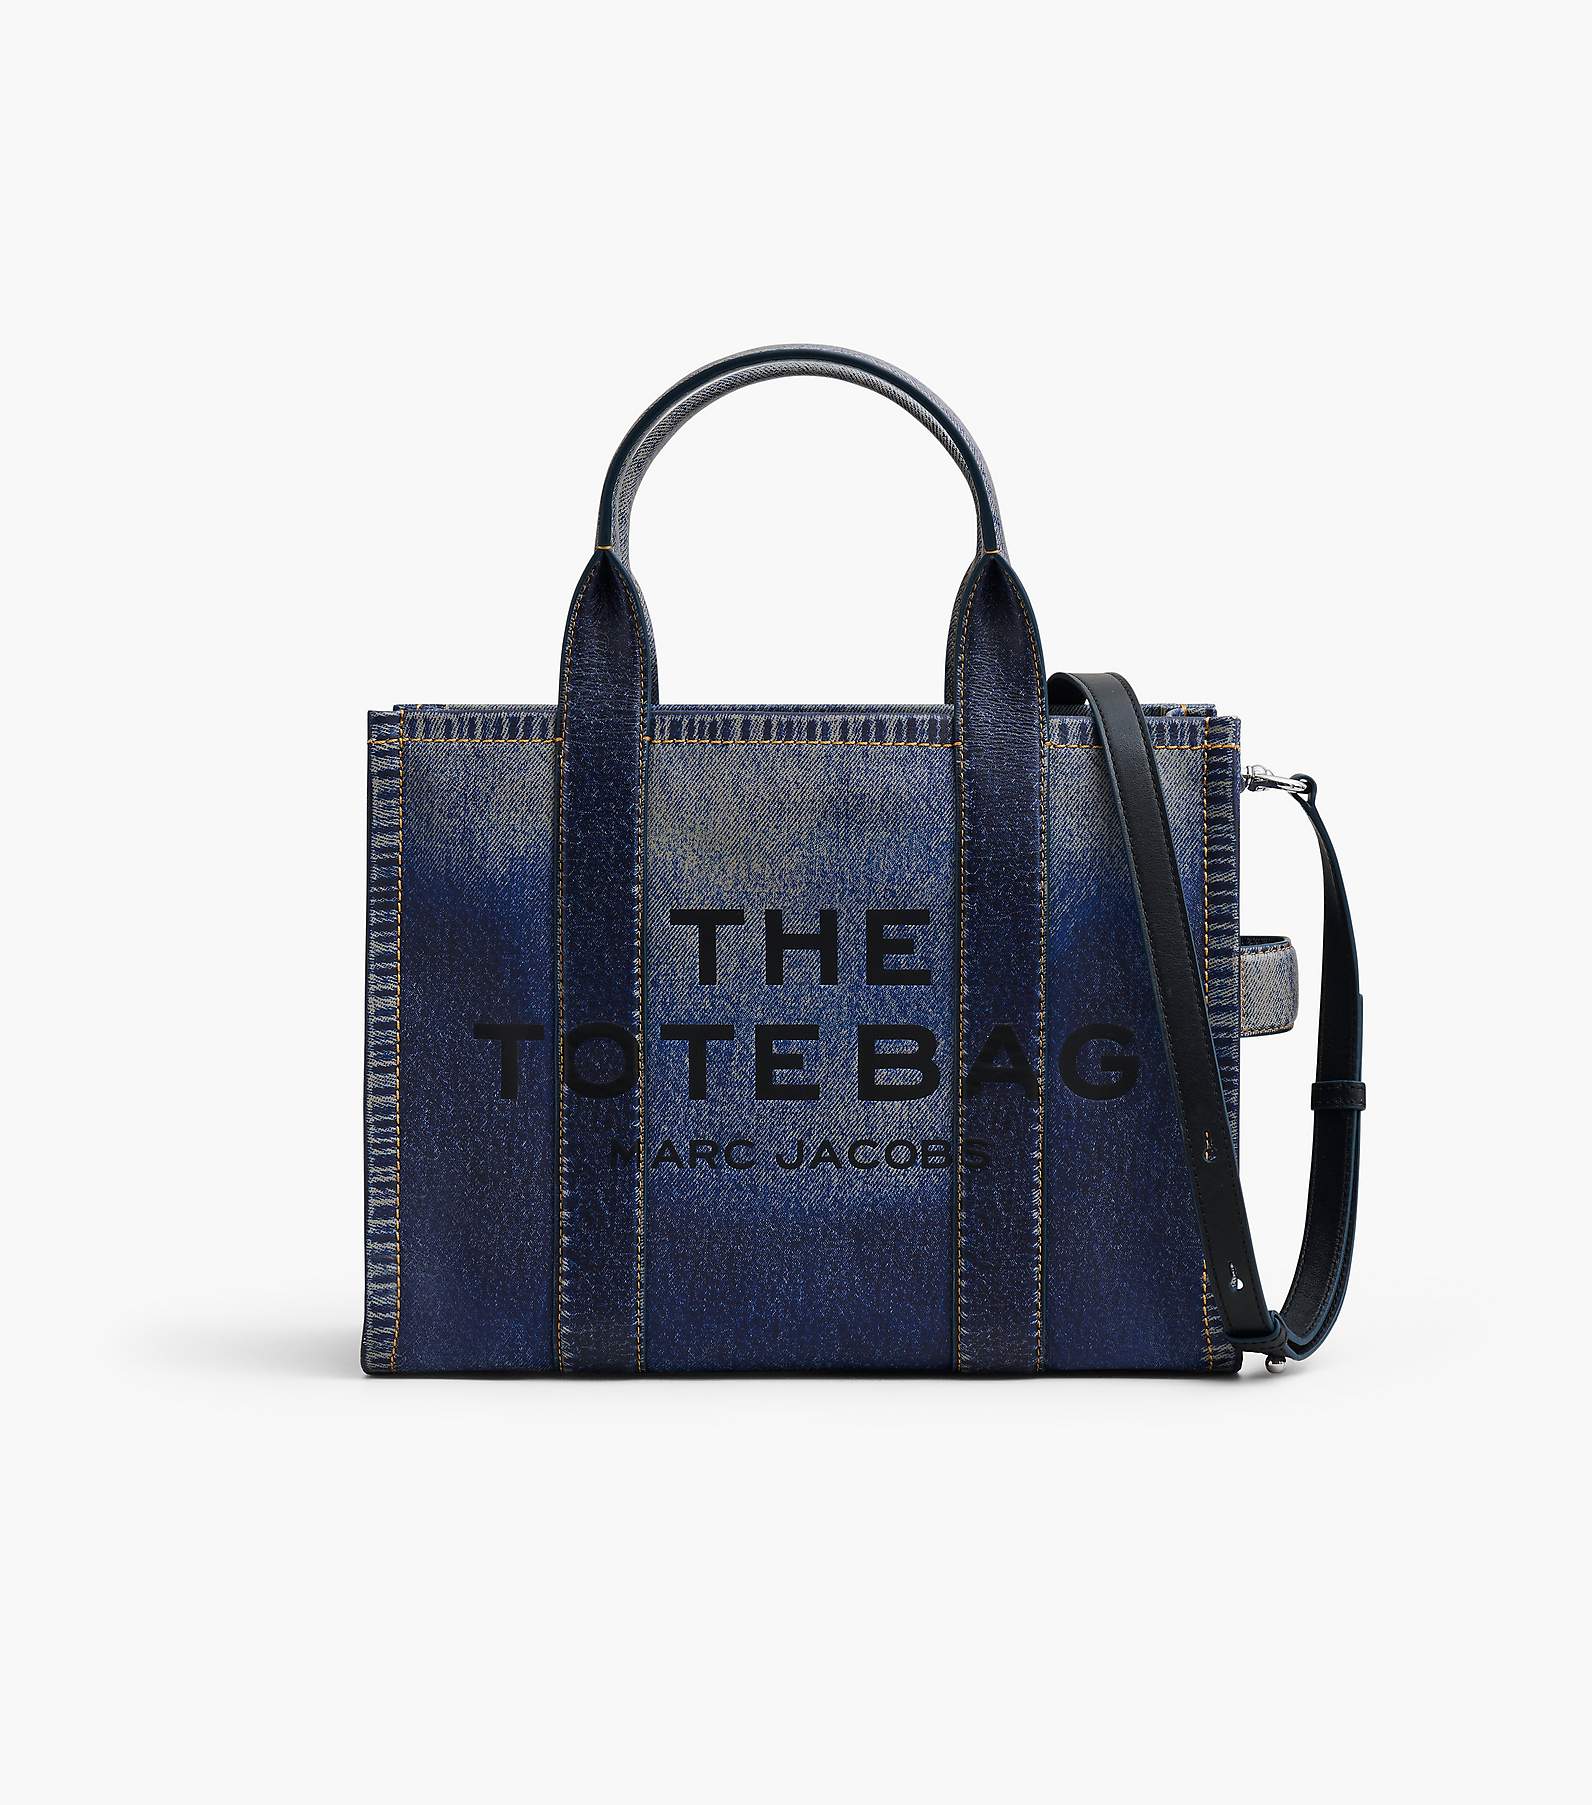 Marc Jacobs The Micro Leather Tote Bag Spring Blue